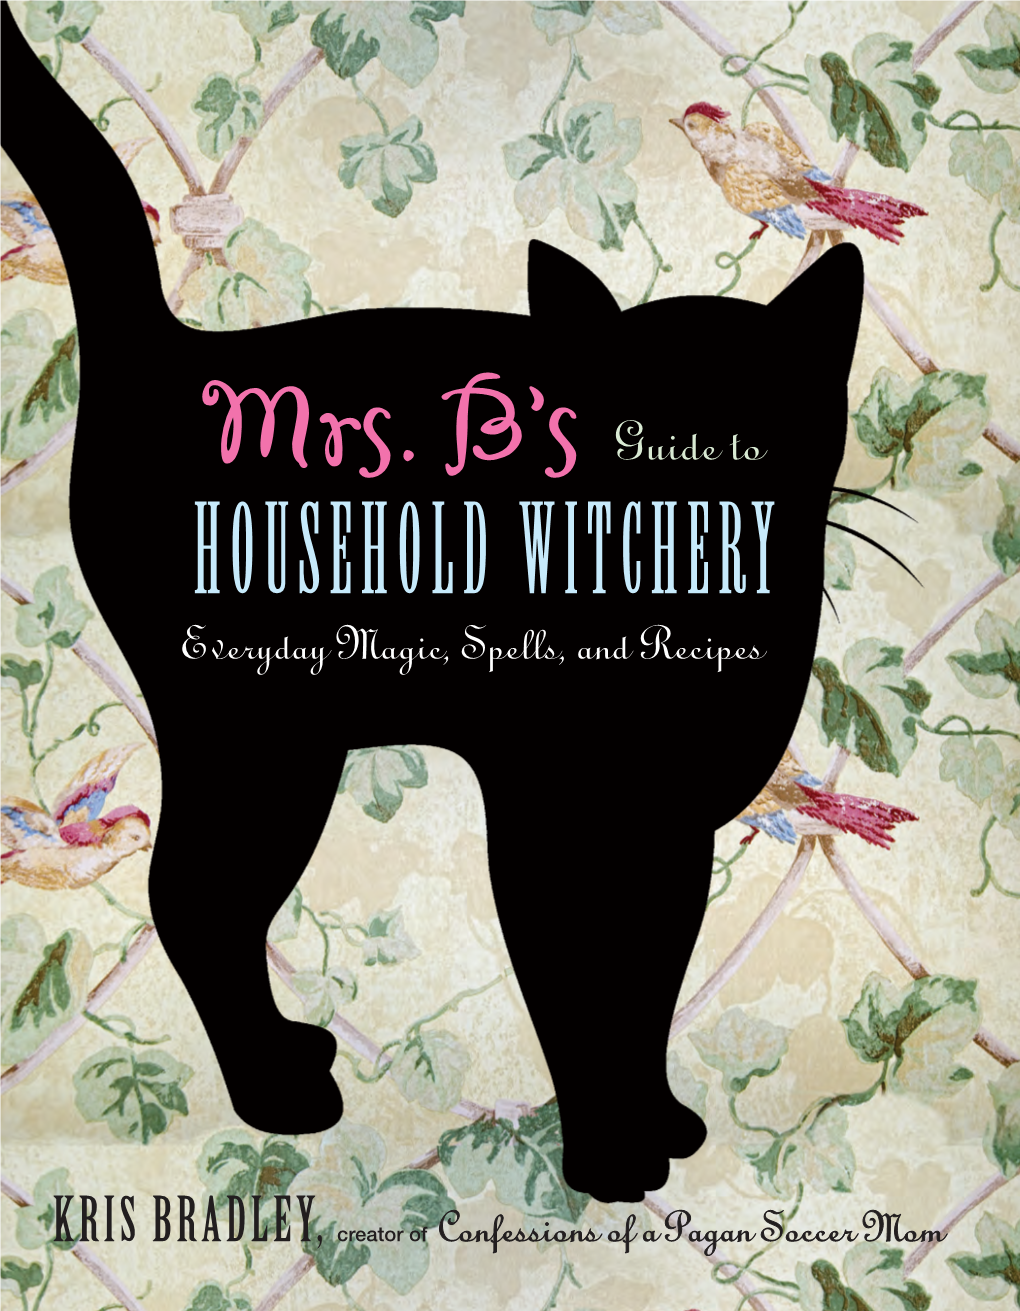 HOUSEHOLD WITCHERY Using Everyday Items and Ingredients, and Learn to Live Like a Domestic Witch! Everyday Magic, Spells, and Recipes